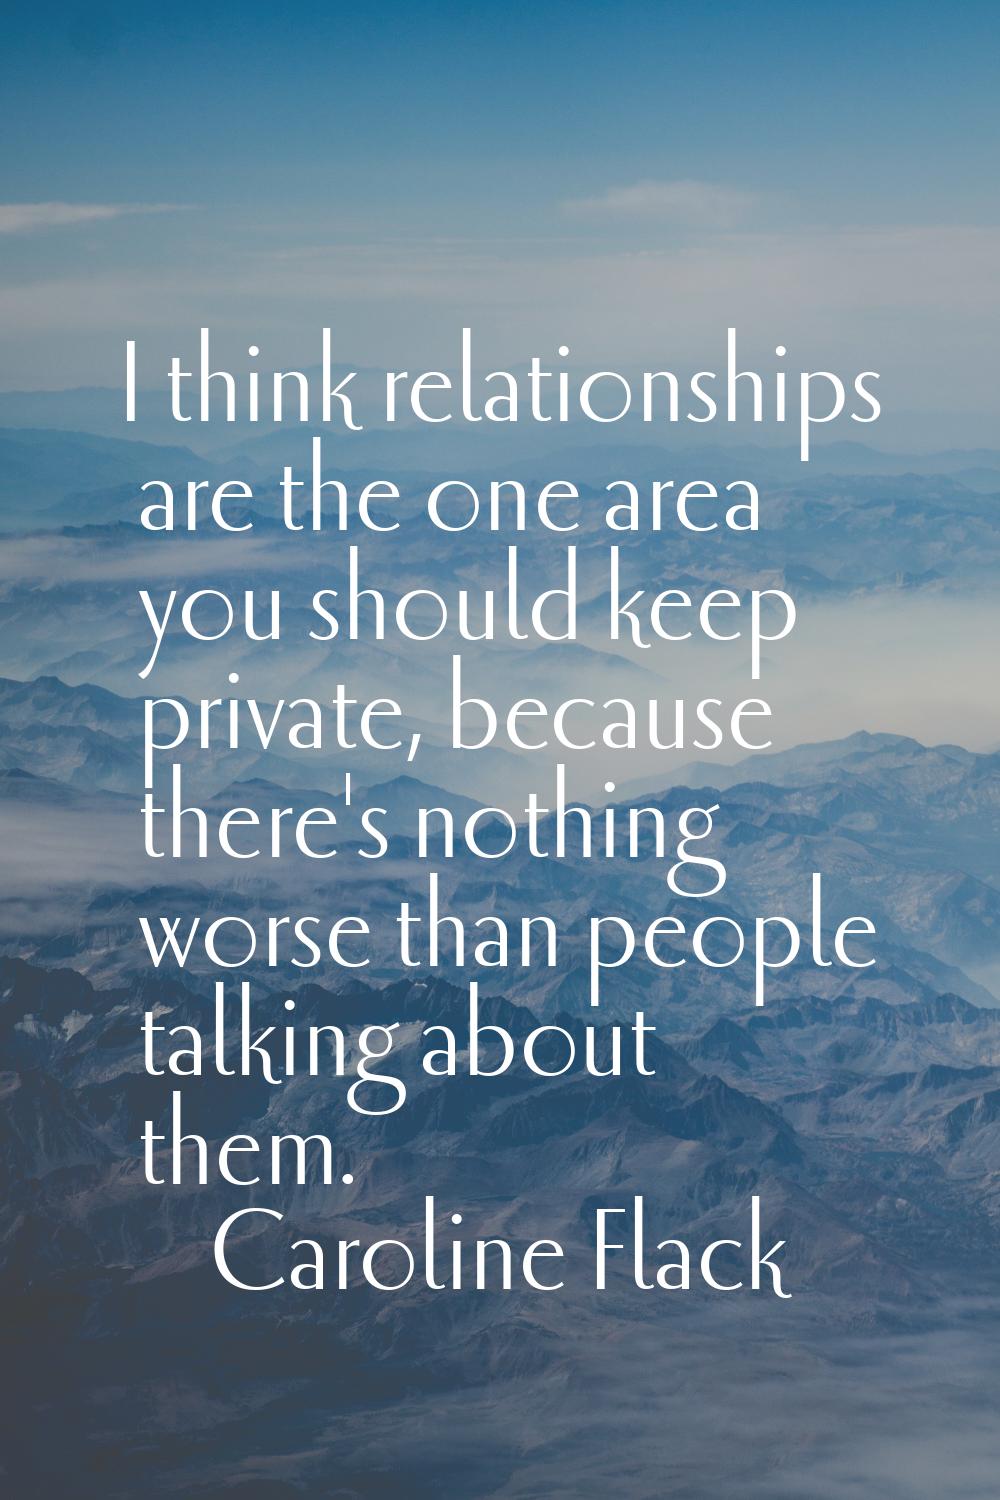 I think relationships are the one area you should keep private, because there's nothing worse than 